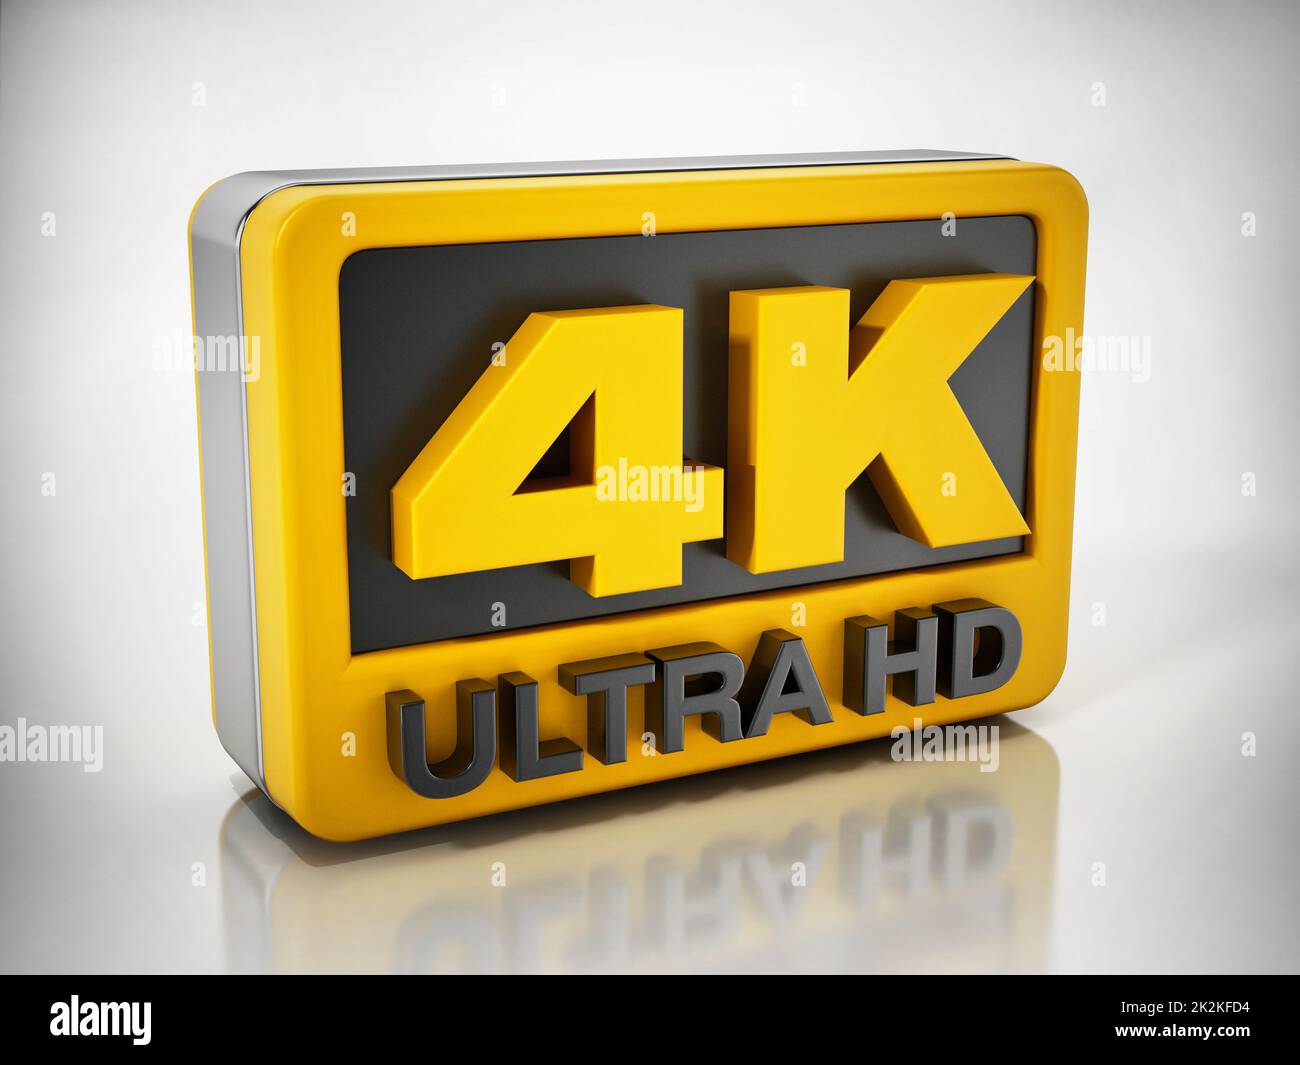 4K ultra HD icon isolated on white background. 3D illustration Stock Photo